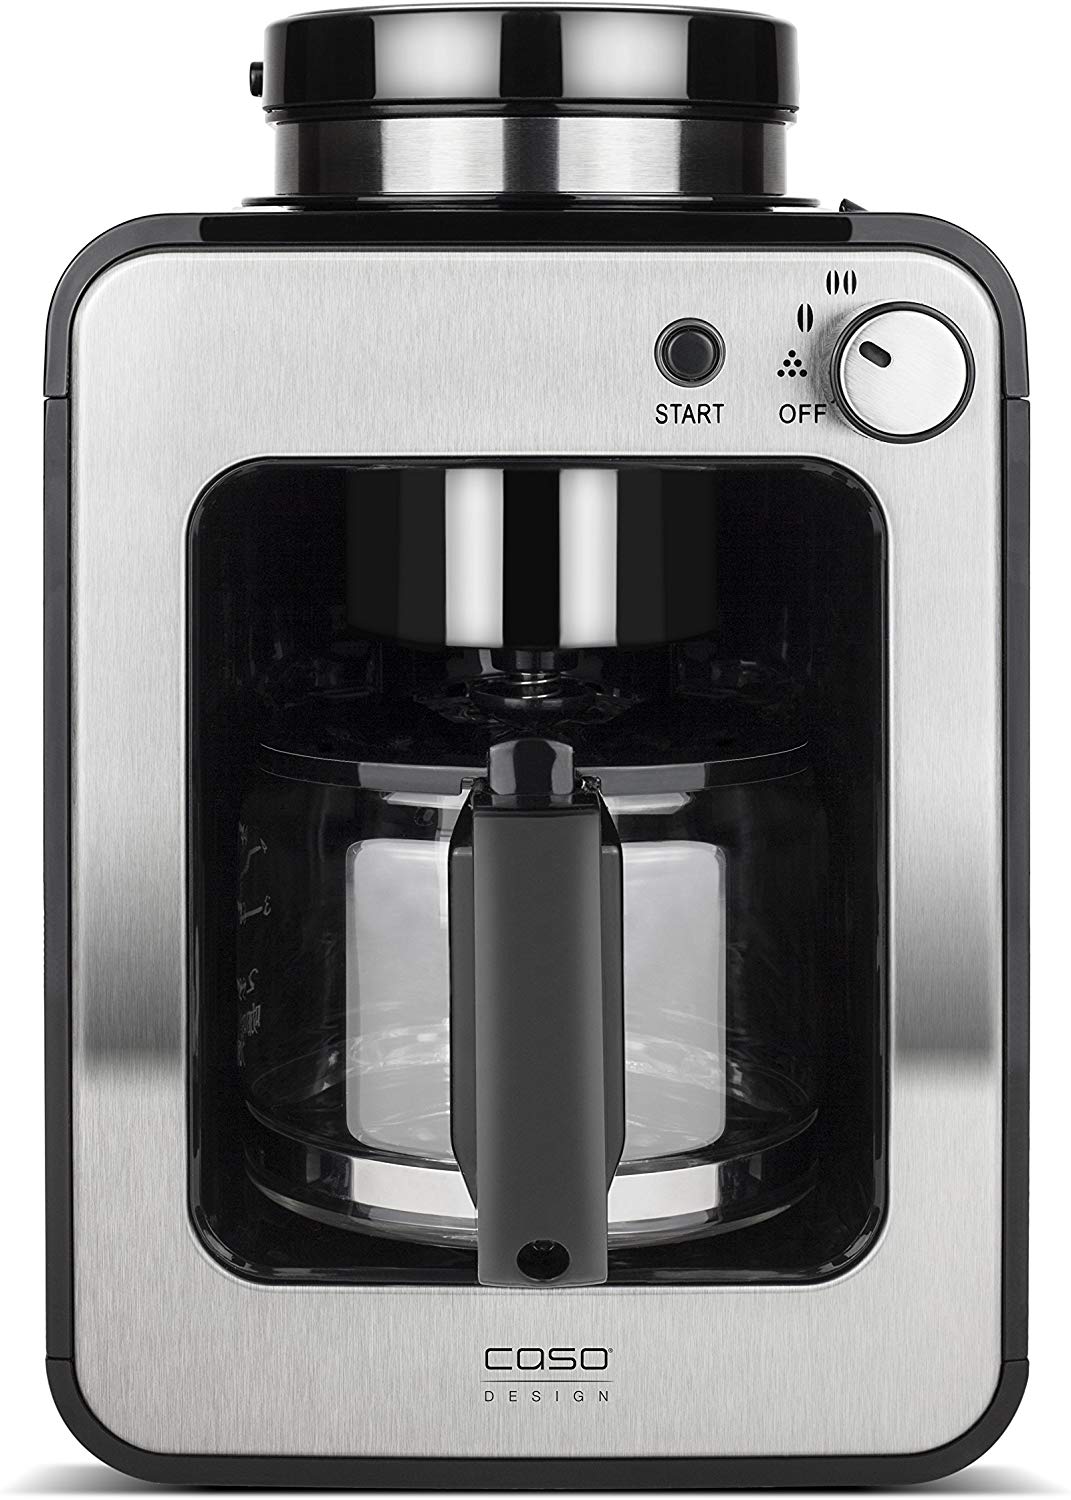 Caso Compact Design Coffee Machine And Grinder, For Up To 4 Cups, Also Suit